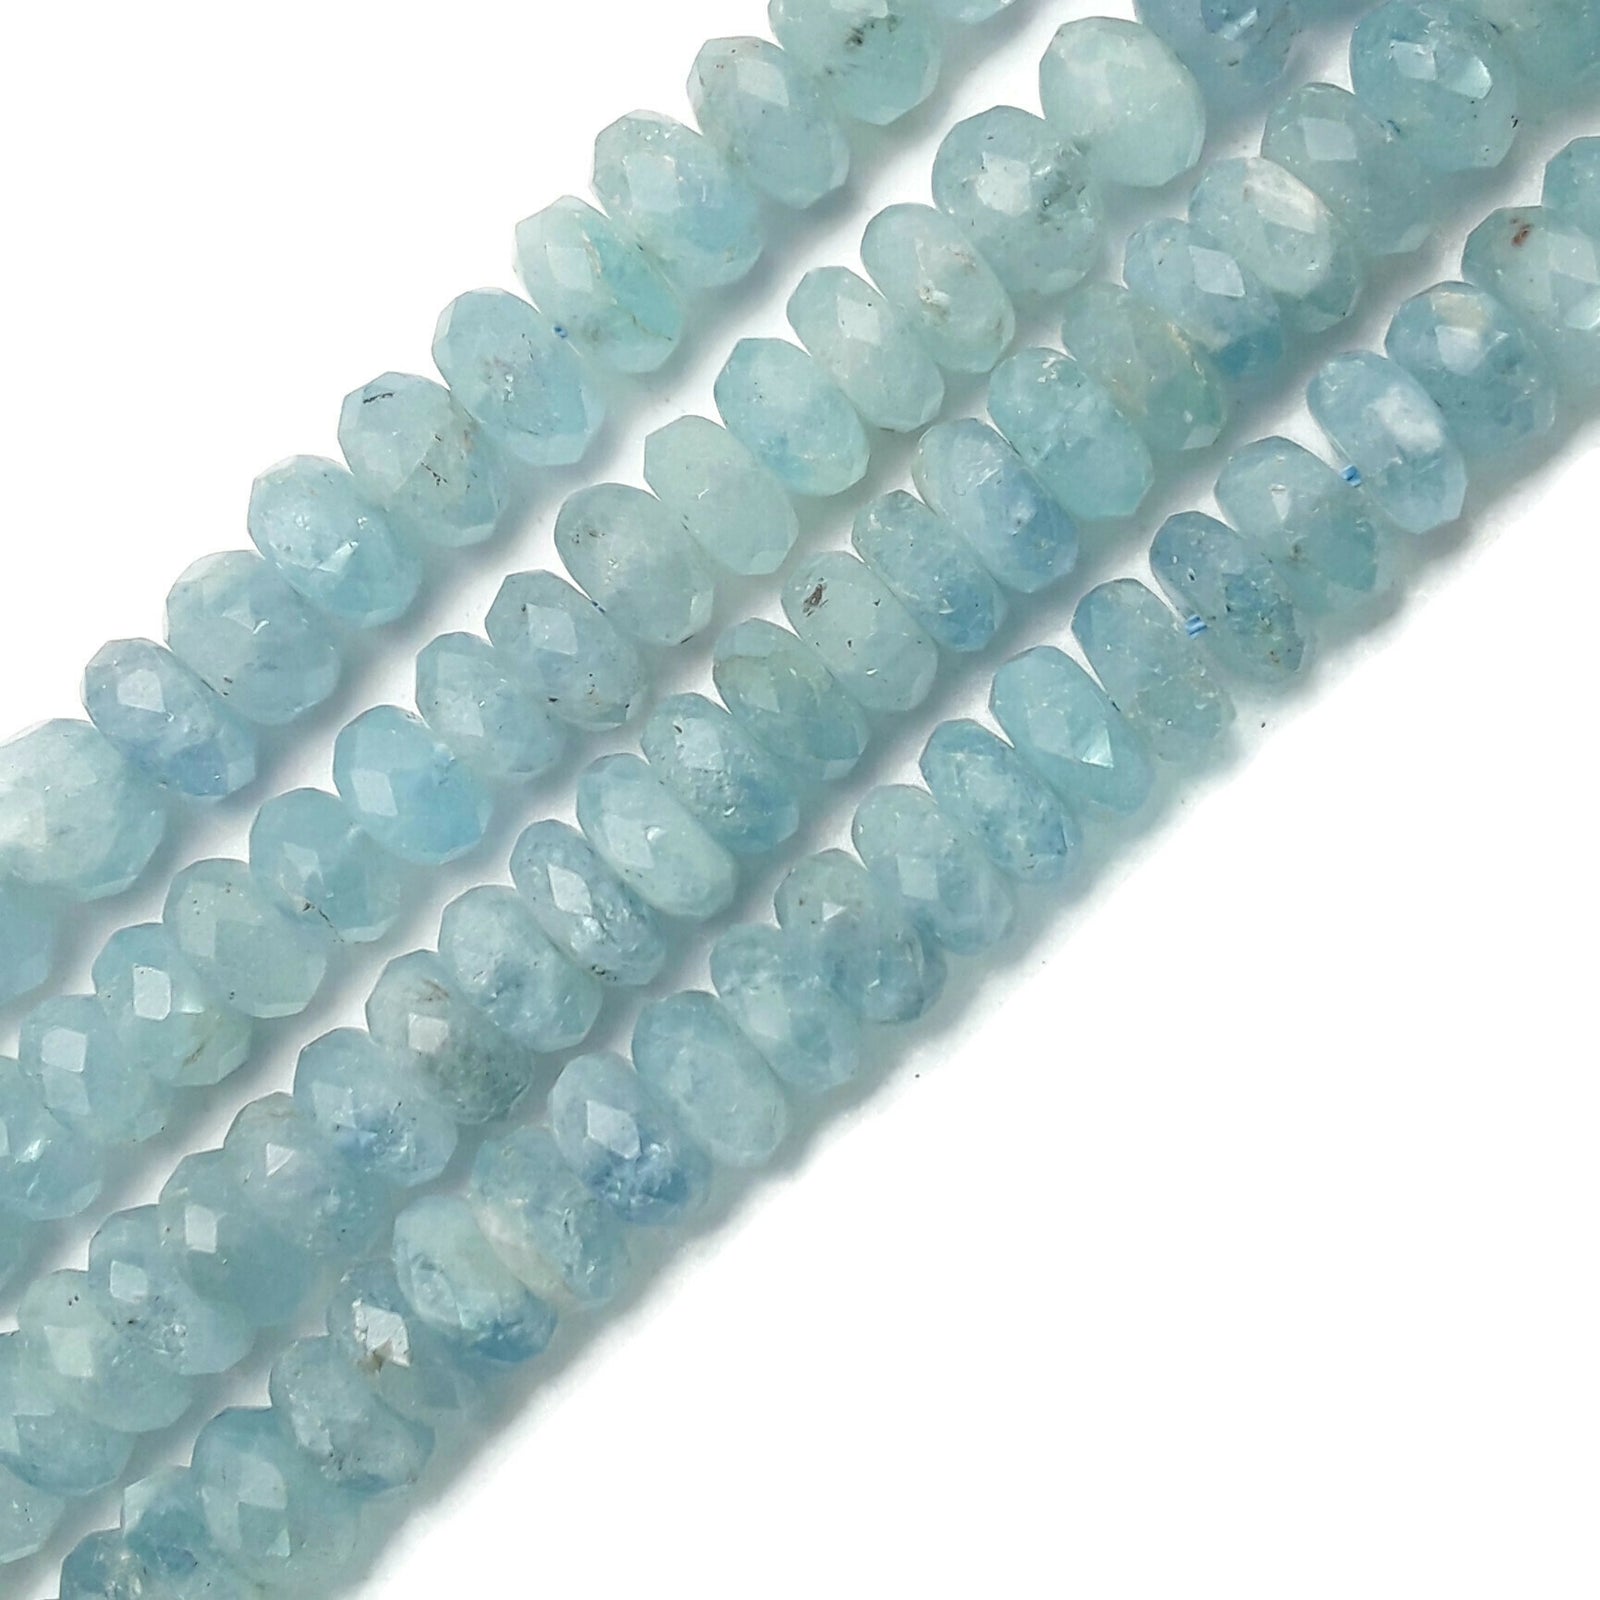 Natural Aquamarine Faceted Rondelle Beads Size Approx 6-8x10mm 15.5